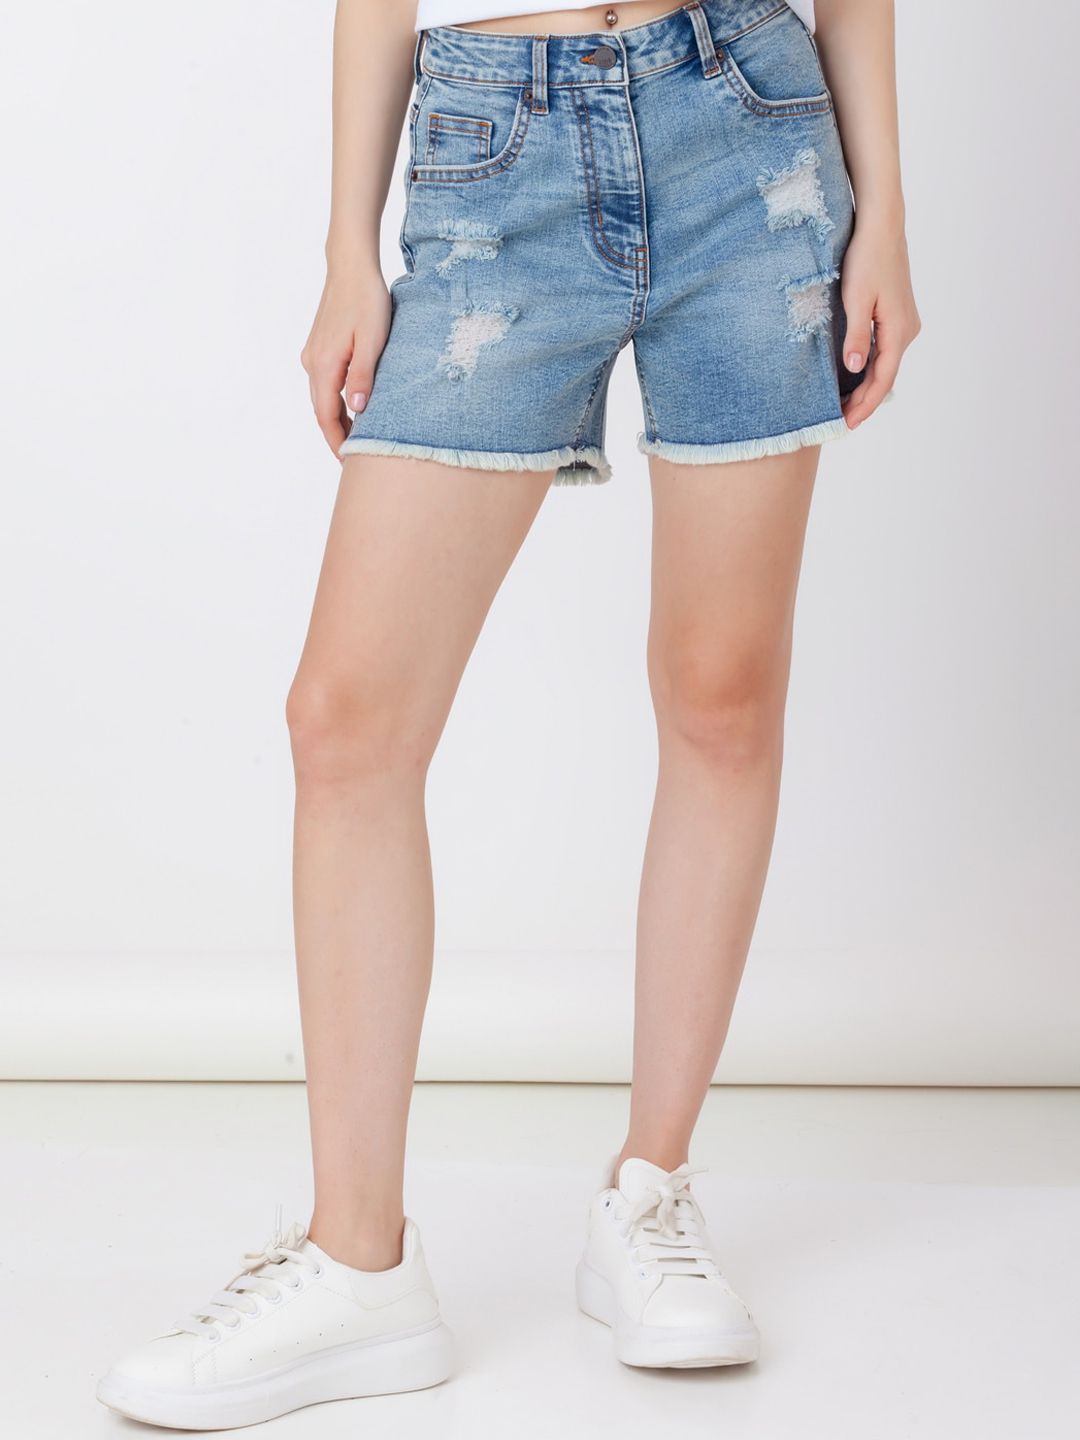 Zink London Women Washed Slim Fit Denim Shorts Price in India